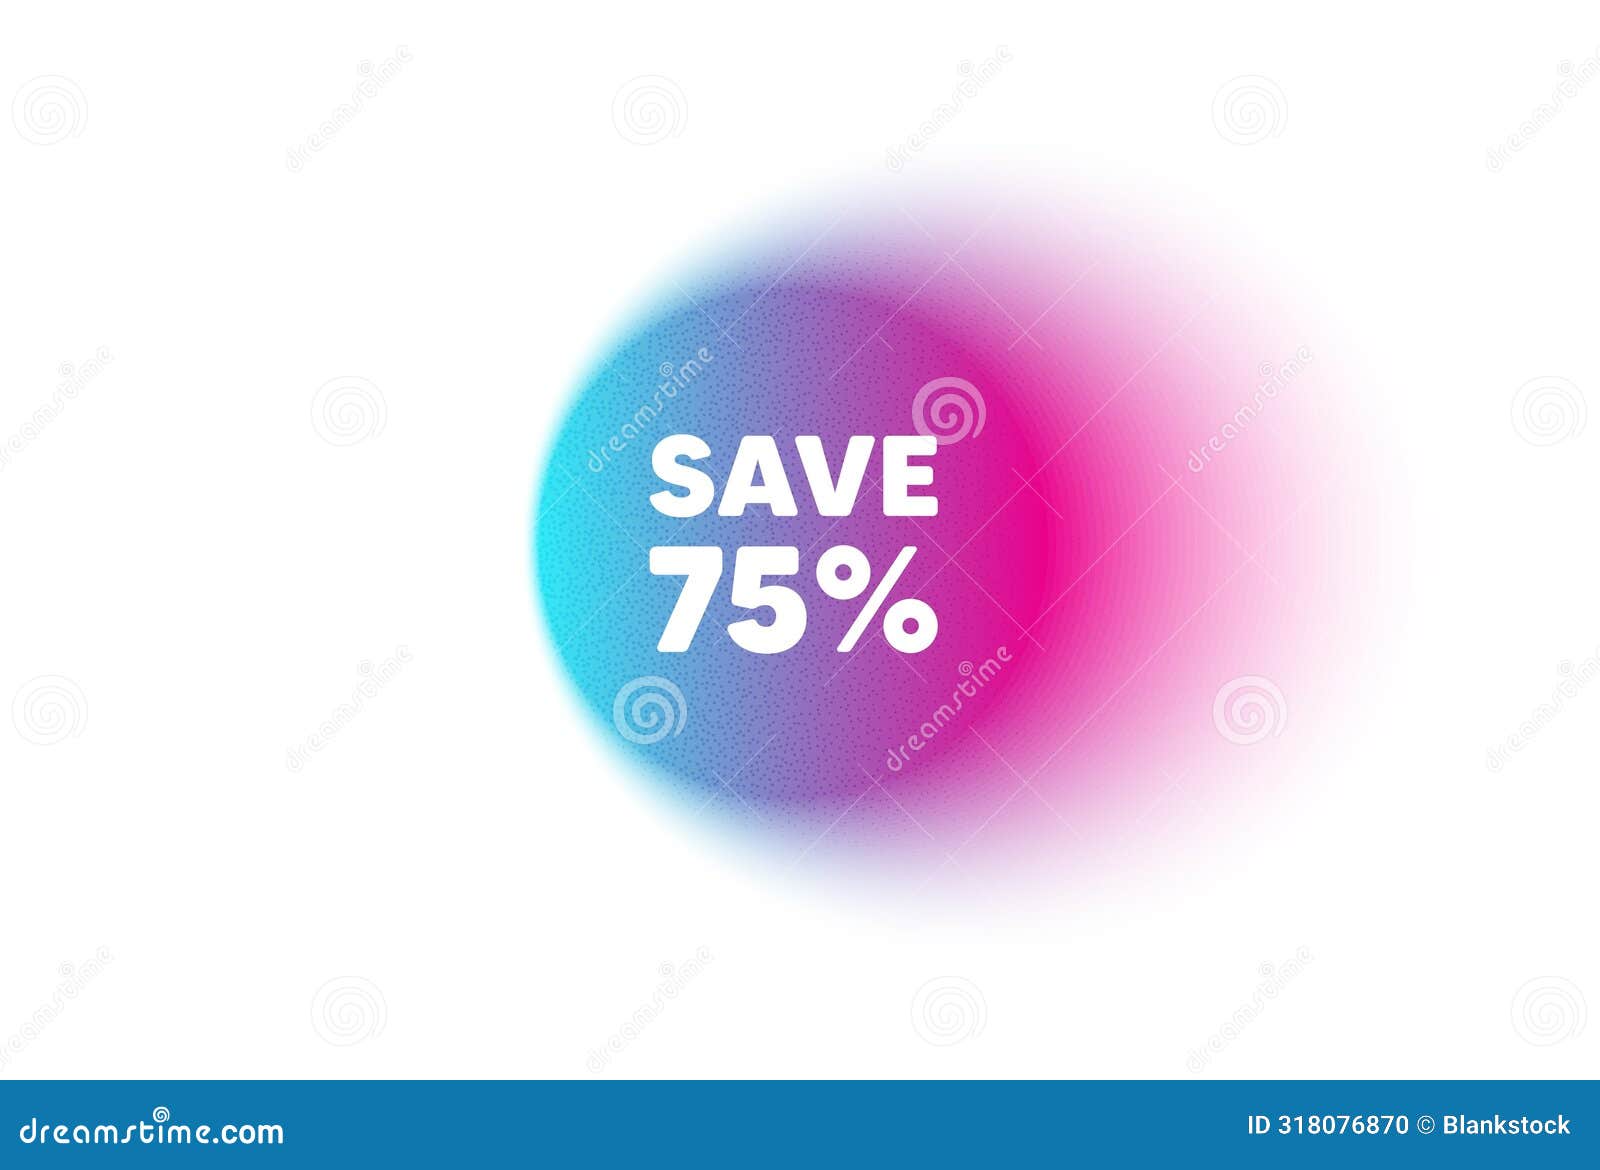 save 75 percent off. sale discount offer price sign. color neon gradient circle banner. 